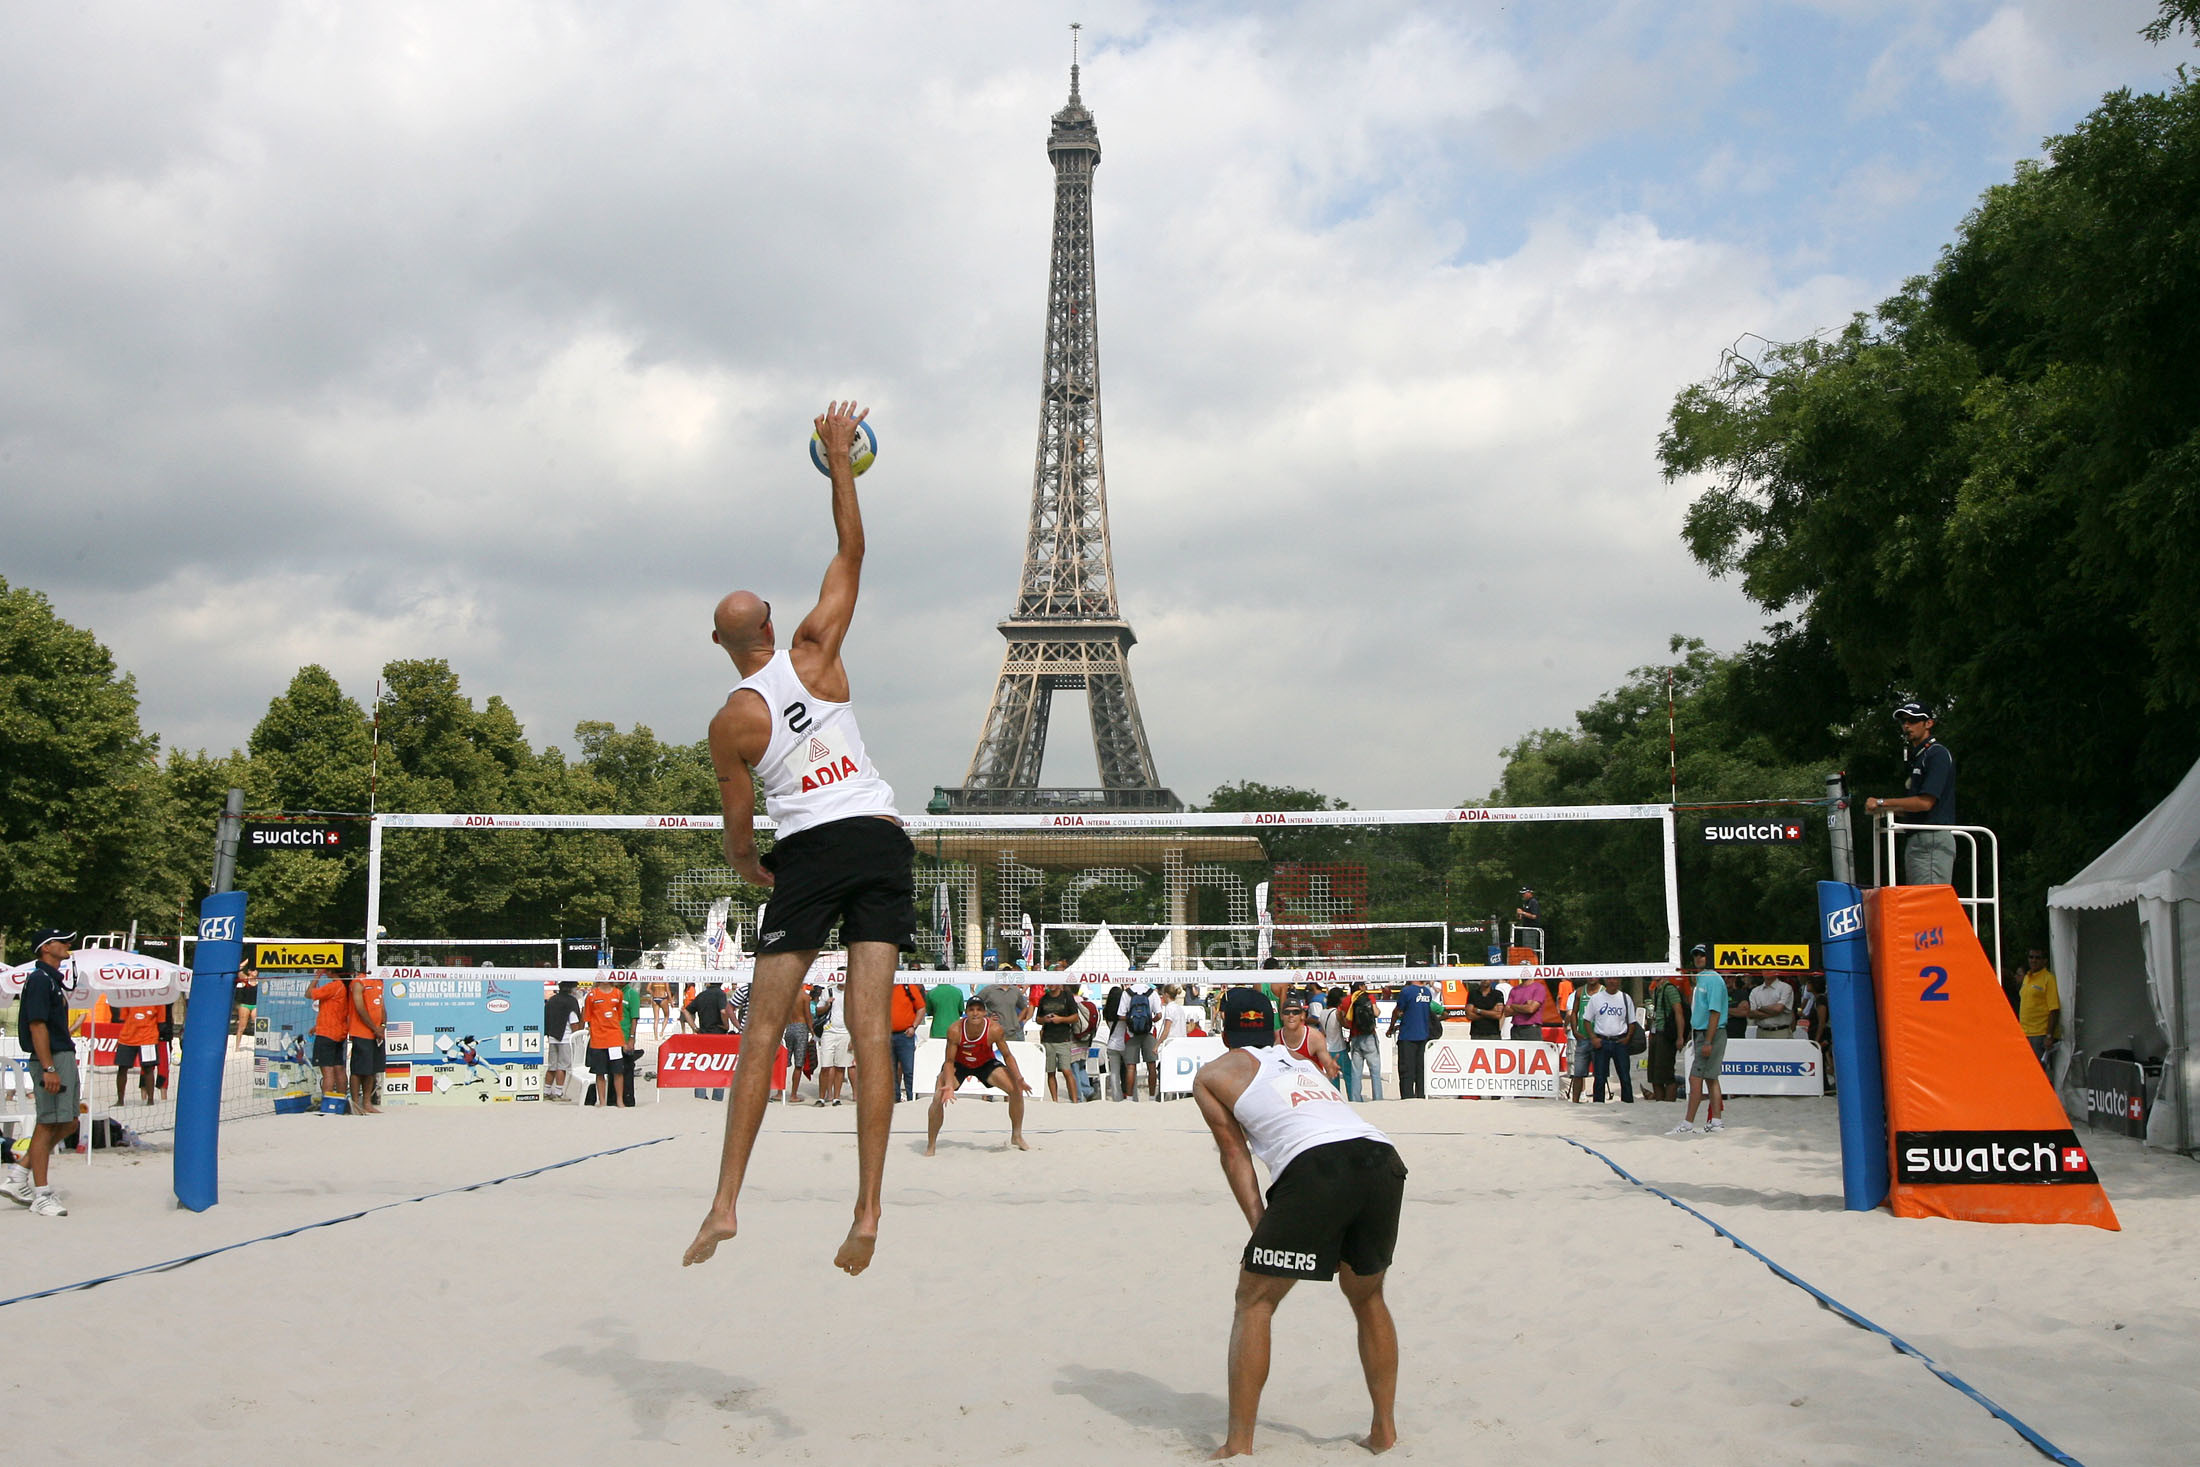 2200x1467 The Eiffel Tower has provided one of the most iconic backgrounds for beach  volleyball.